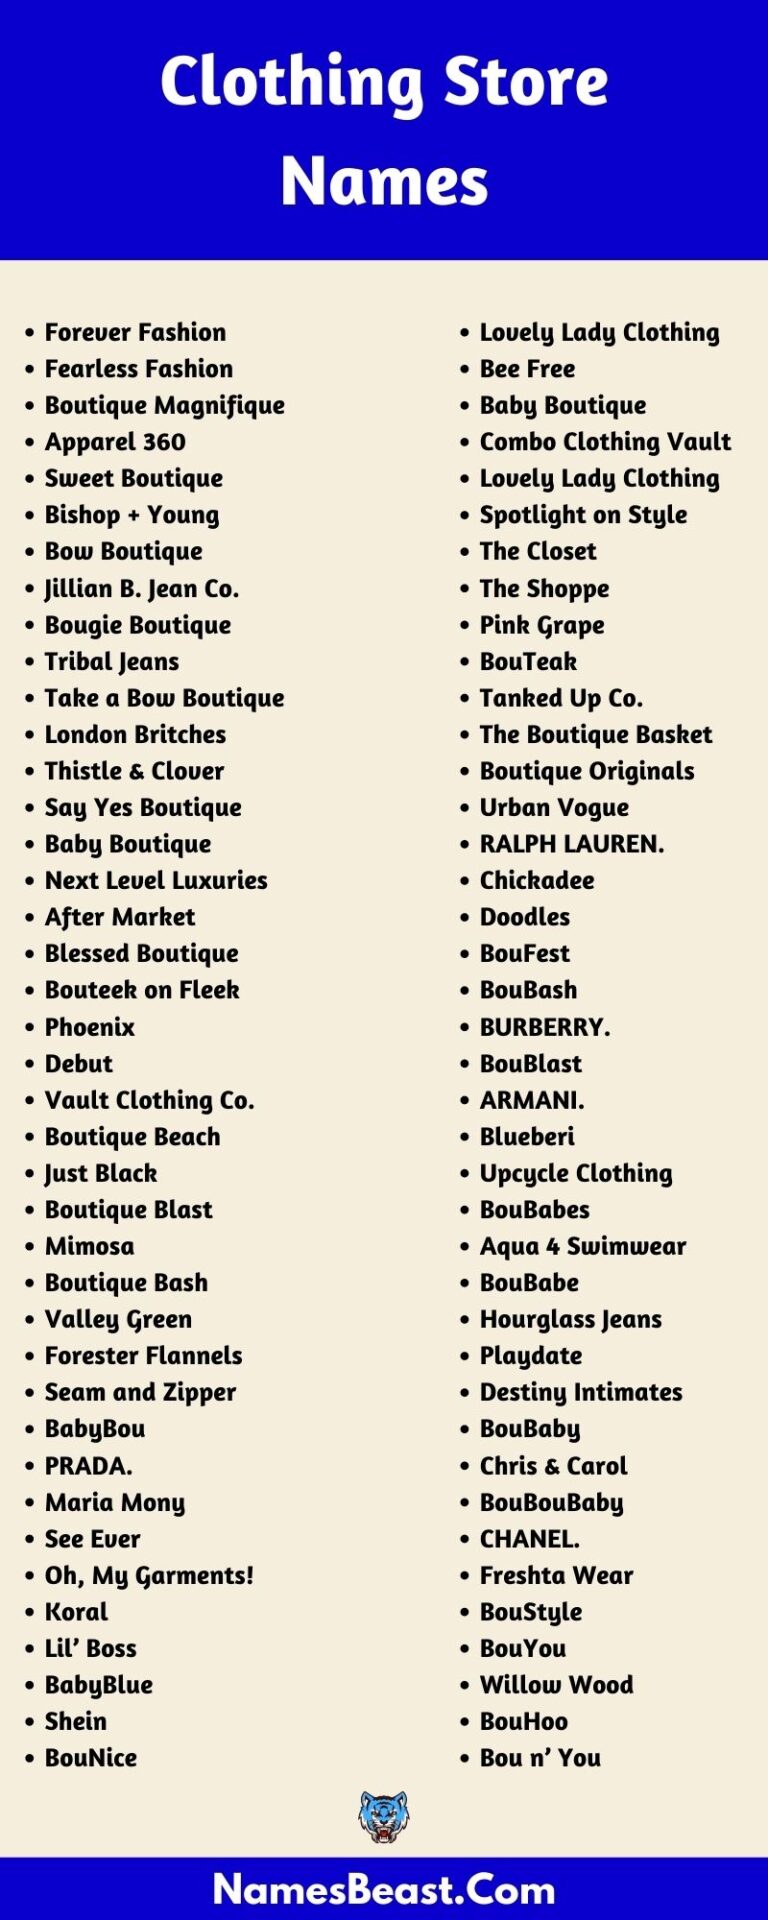 Clothing Store Names [2022] 650+ Clothing Brand Name Ideas